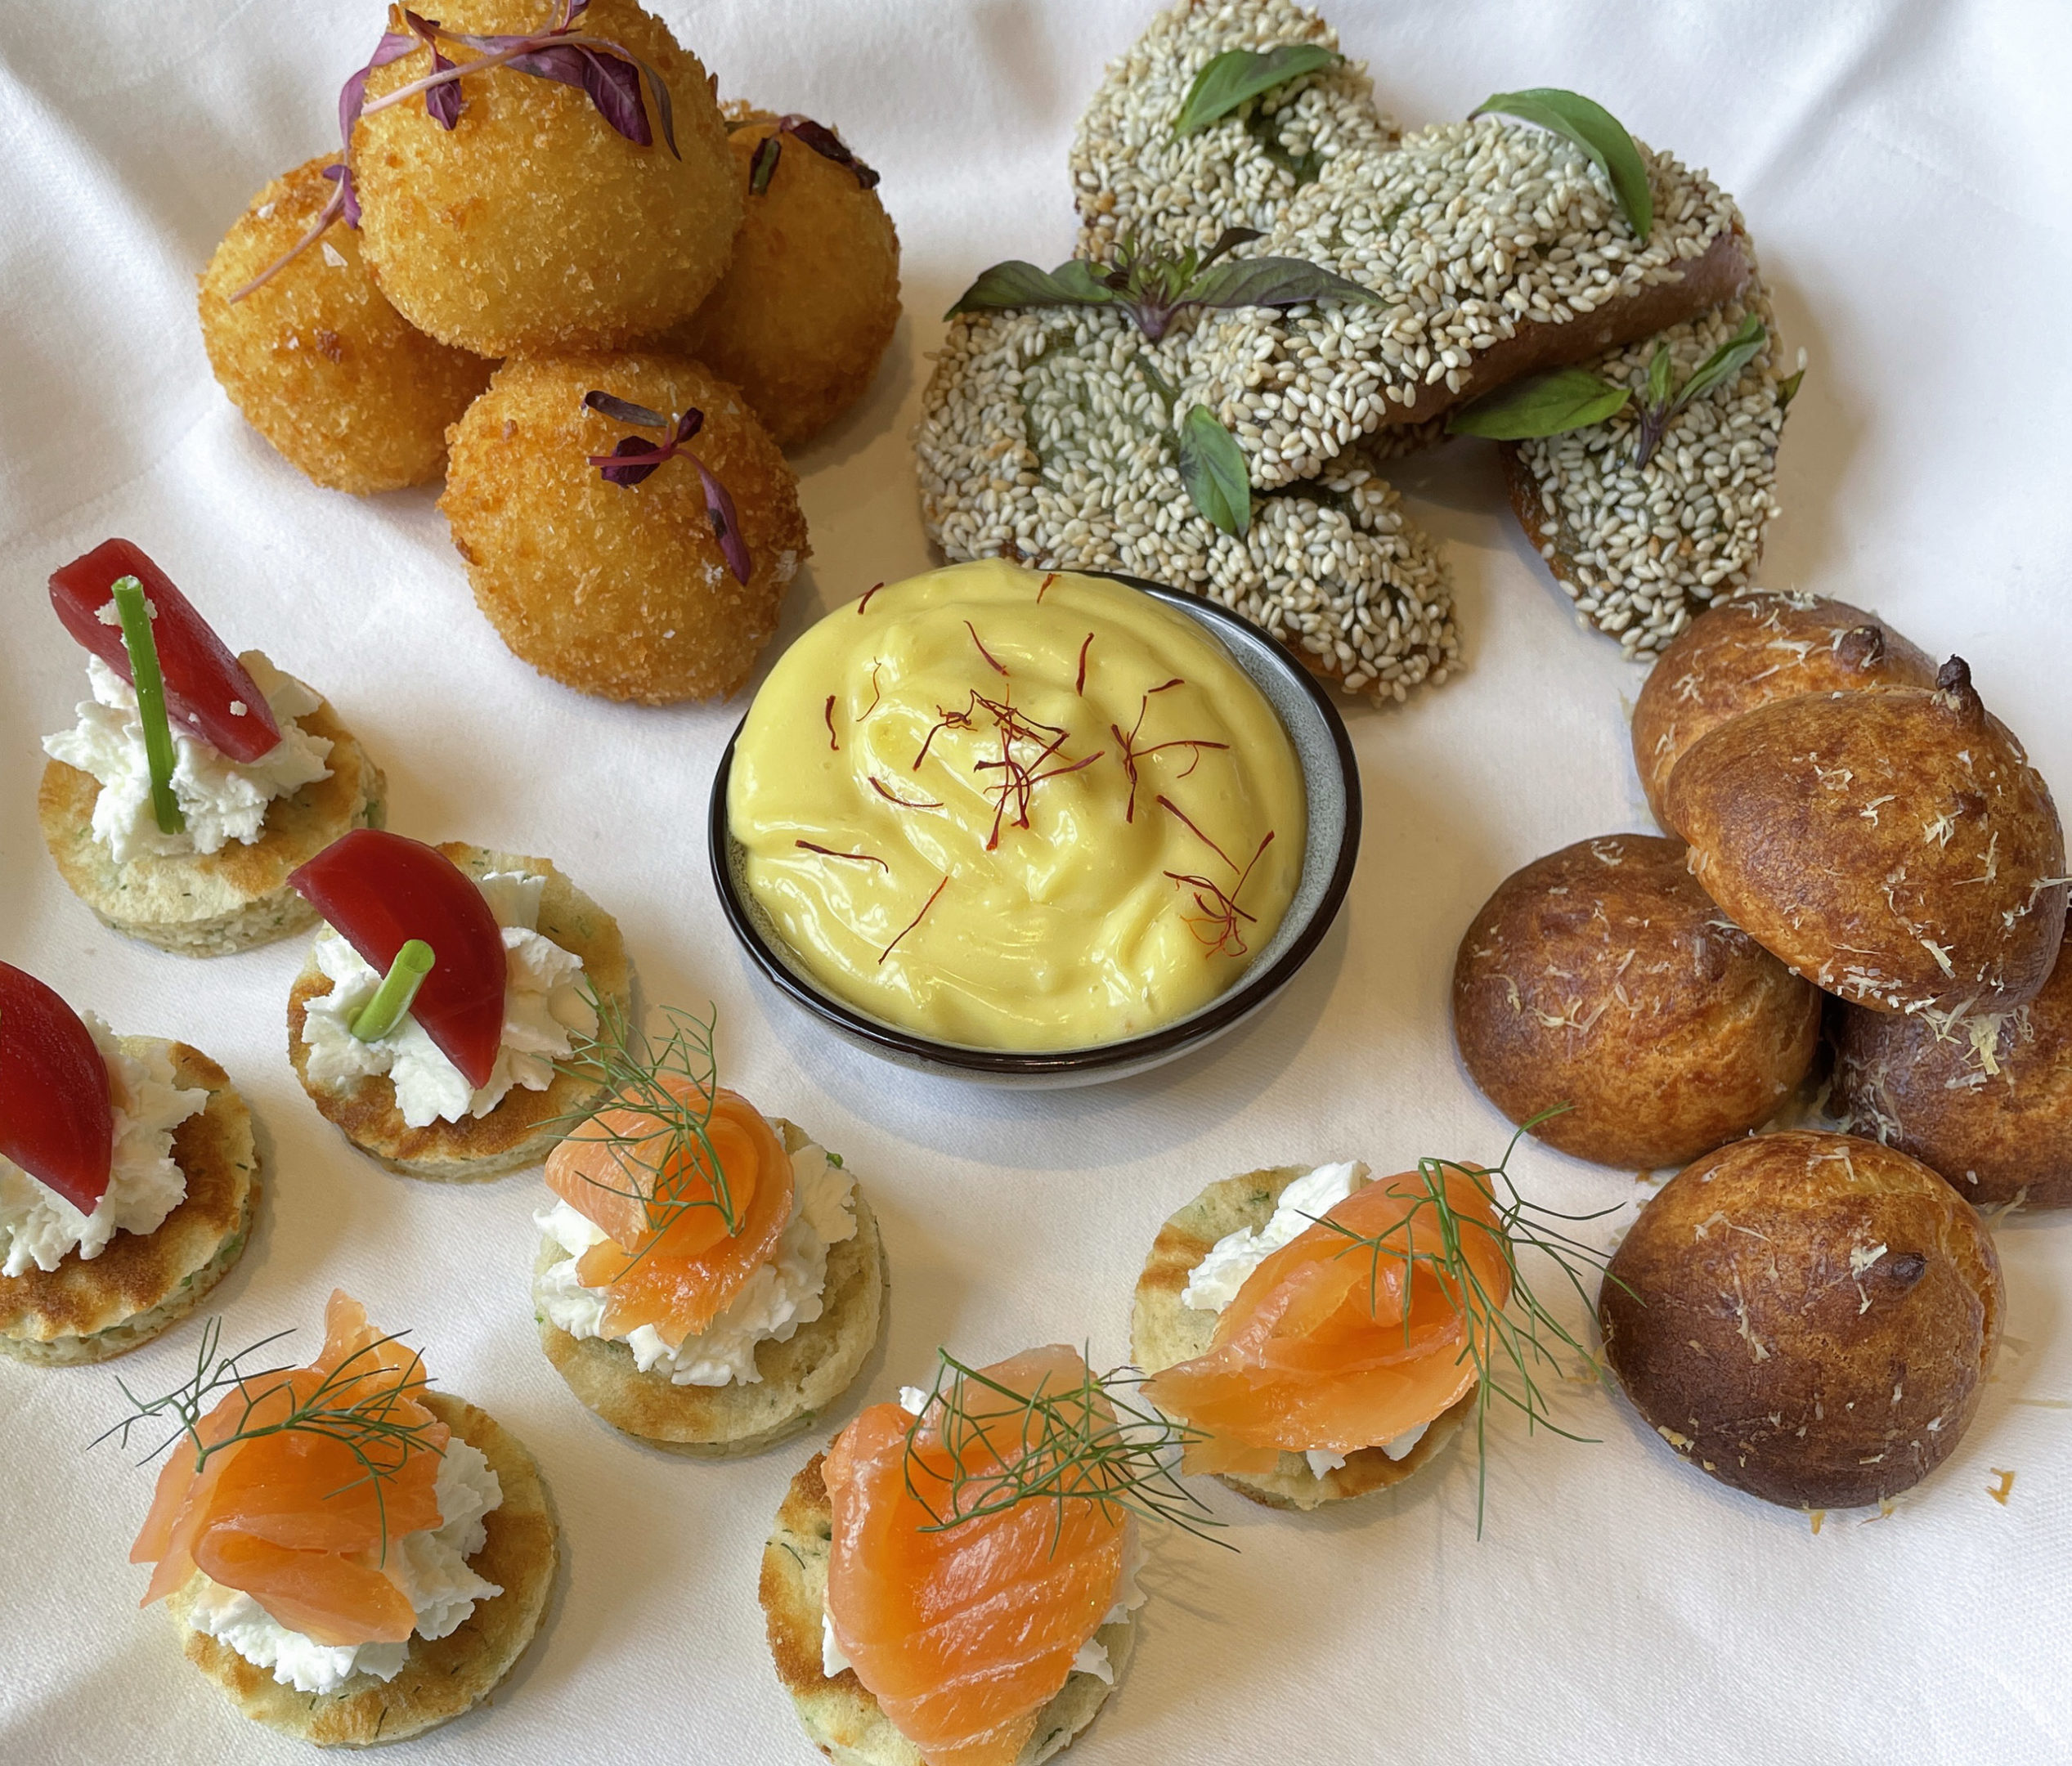 A selection of canapes and a dip made during a canapes cookery course at Swinton Cookery School near Harrogate in North Yorkshire